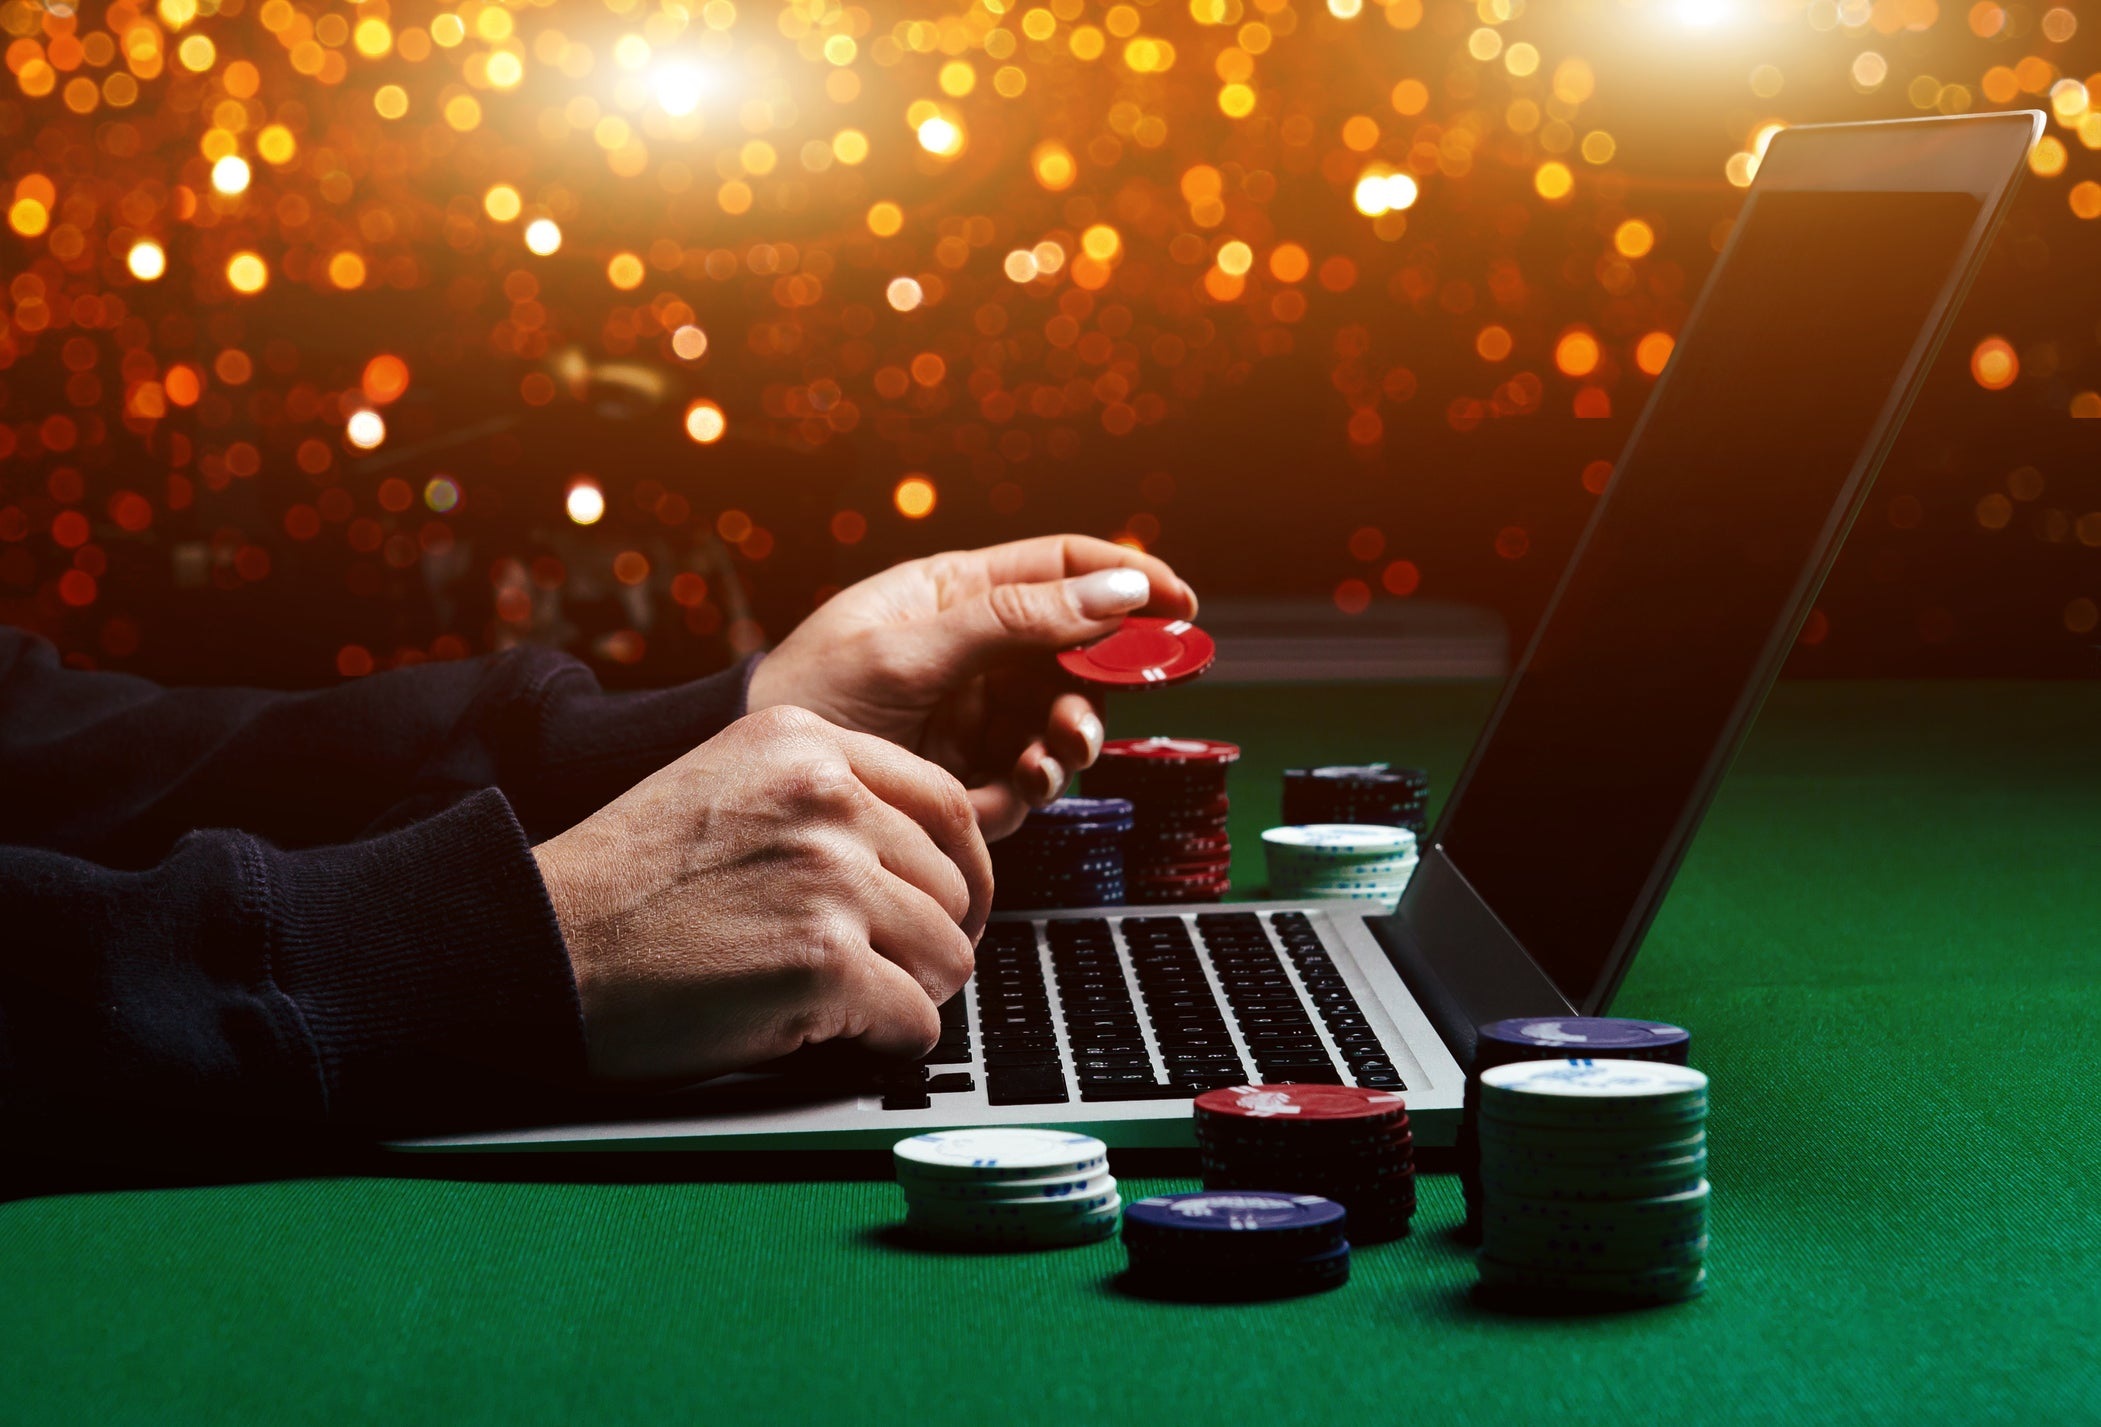 Become an OKBet Casino and Sport Betting Agent and Be Your Own Boss